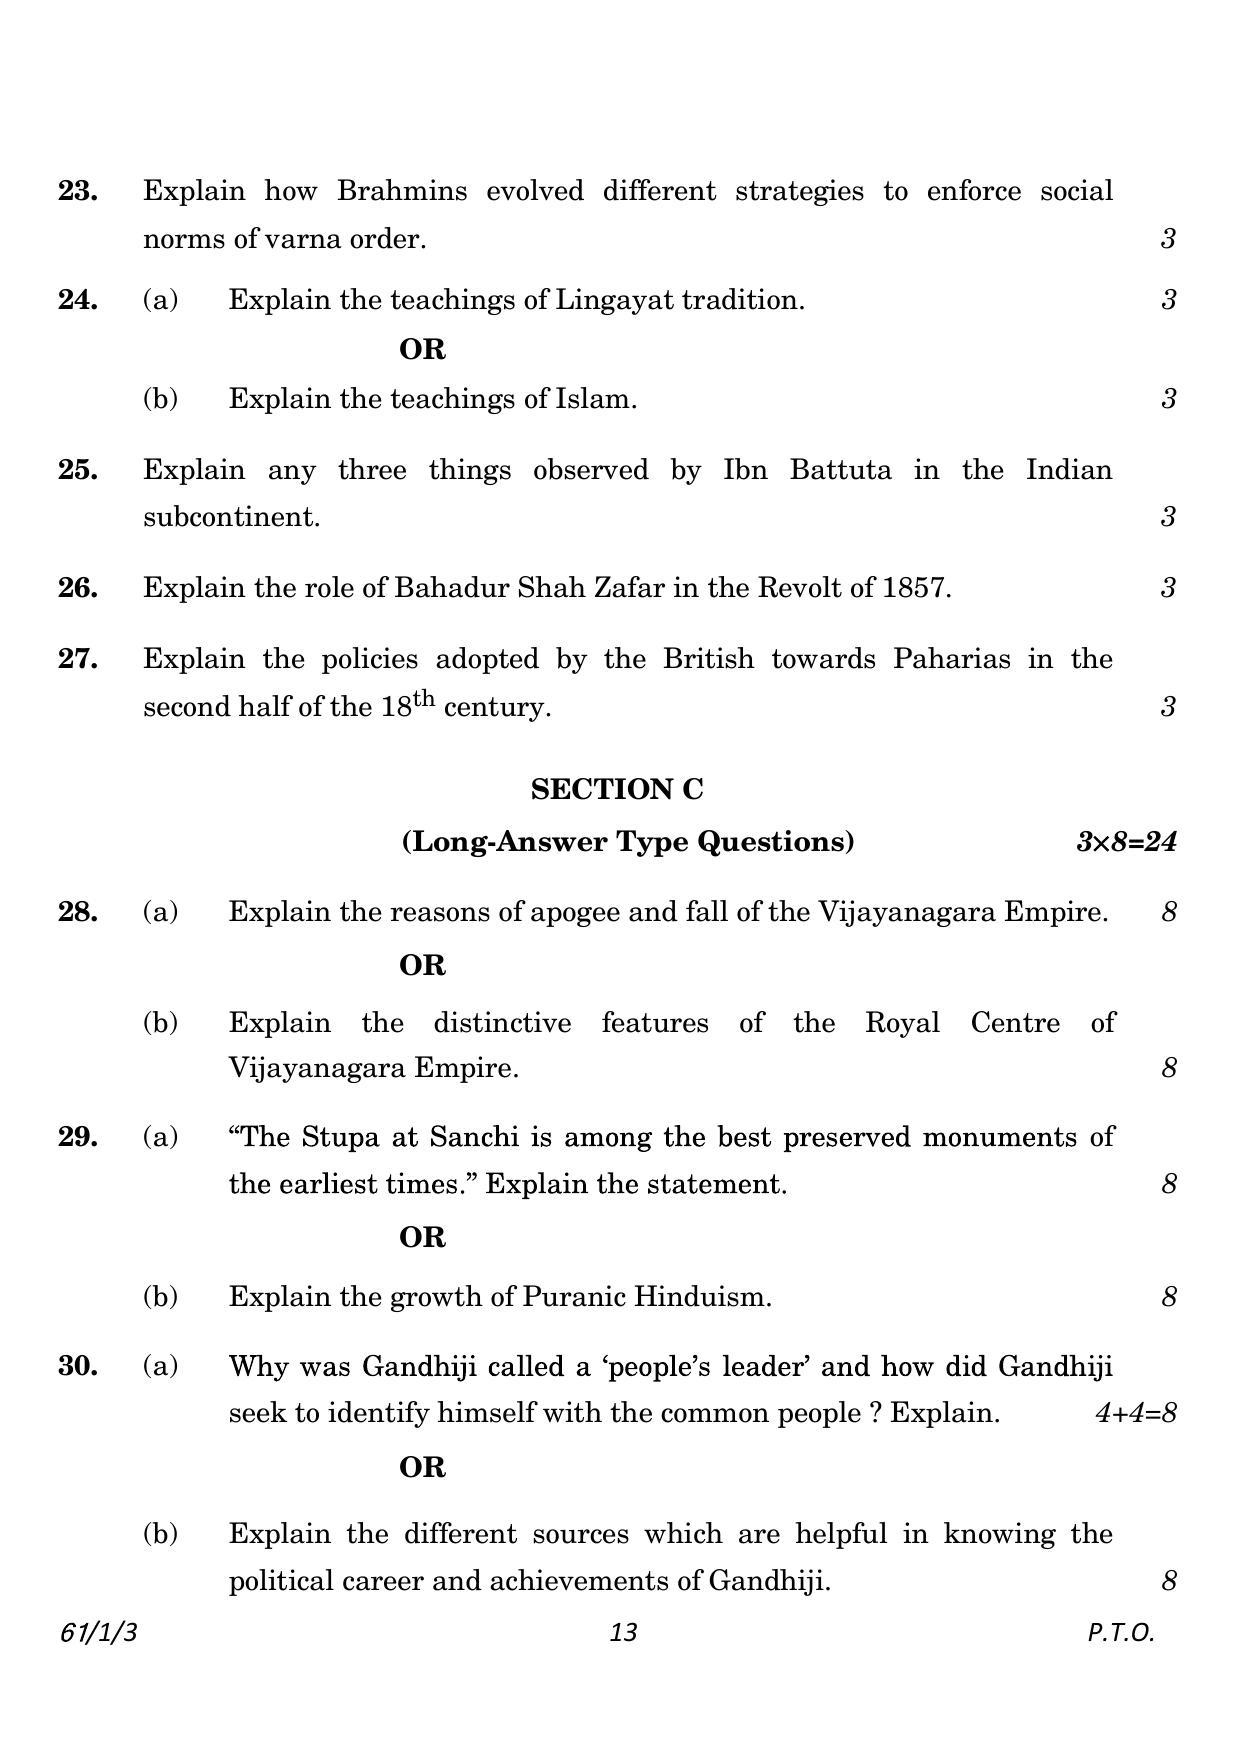 CBSE Class 12 61-1-3 History 2023 Question Paper - Page 13